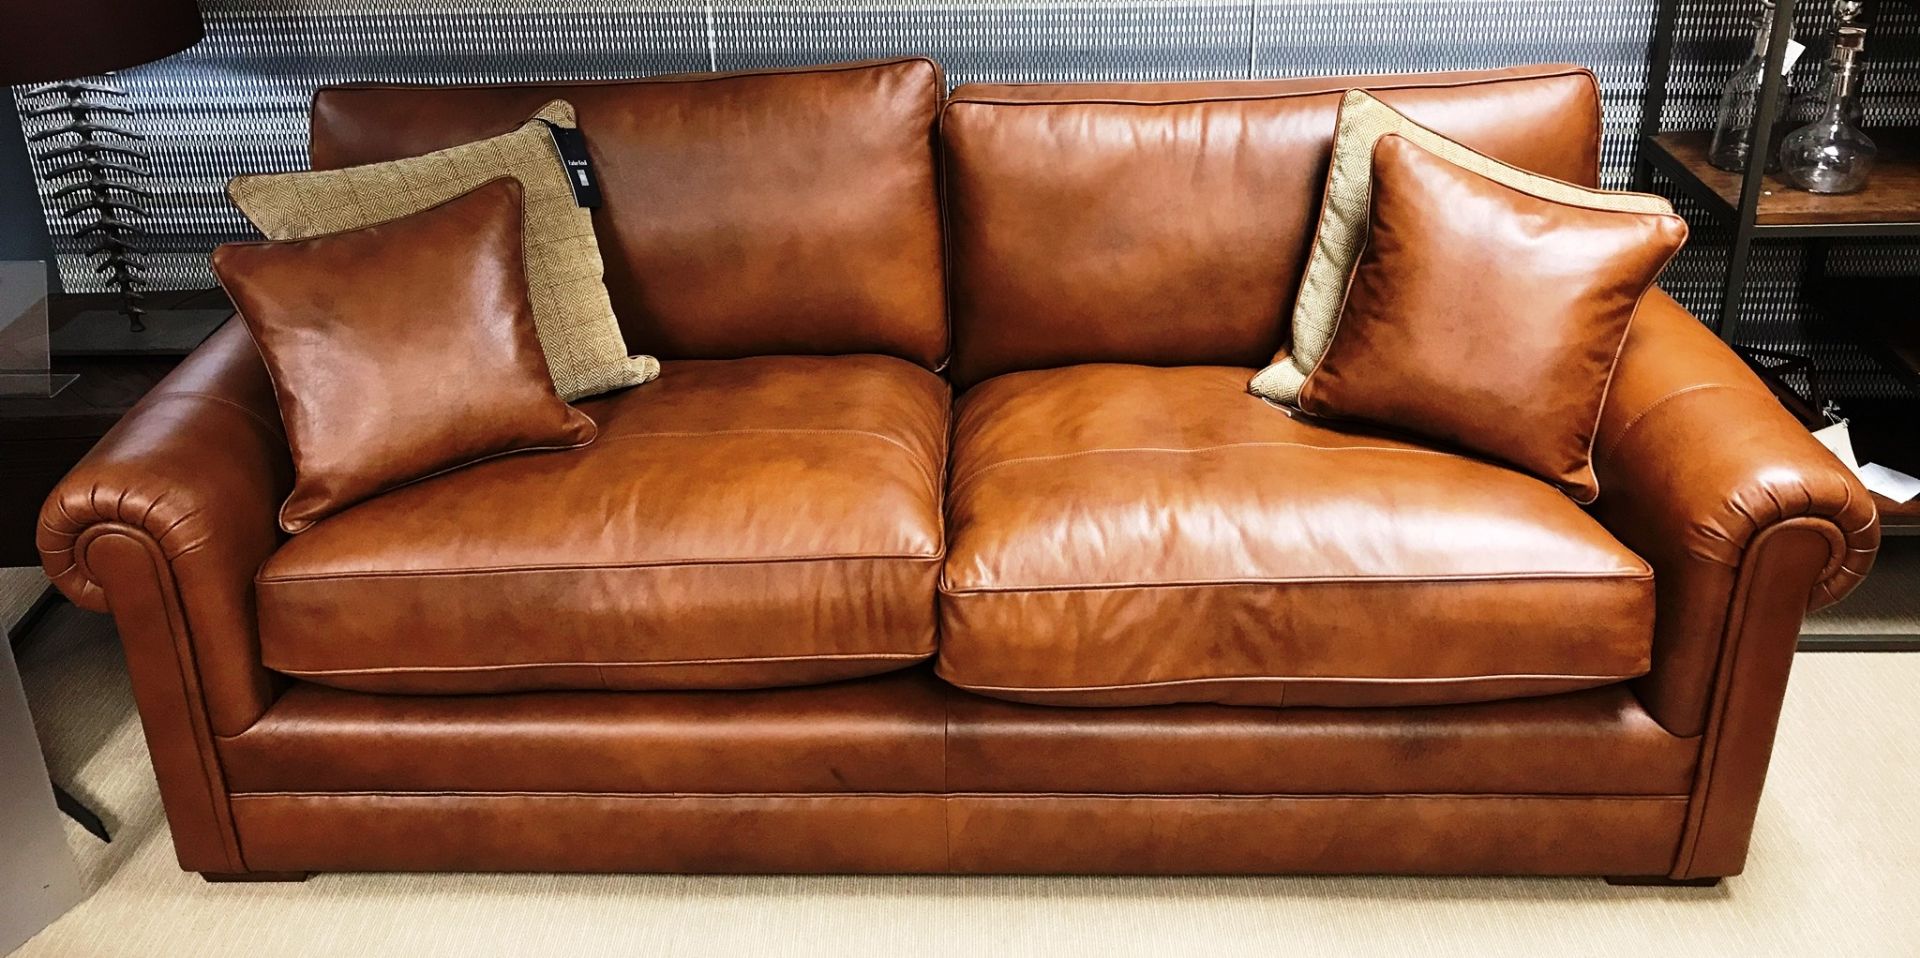 Parker Knoll Canterbury Grand & 2 Seater Leather Sofas - RRP£5,120 - Image 2 of 5